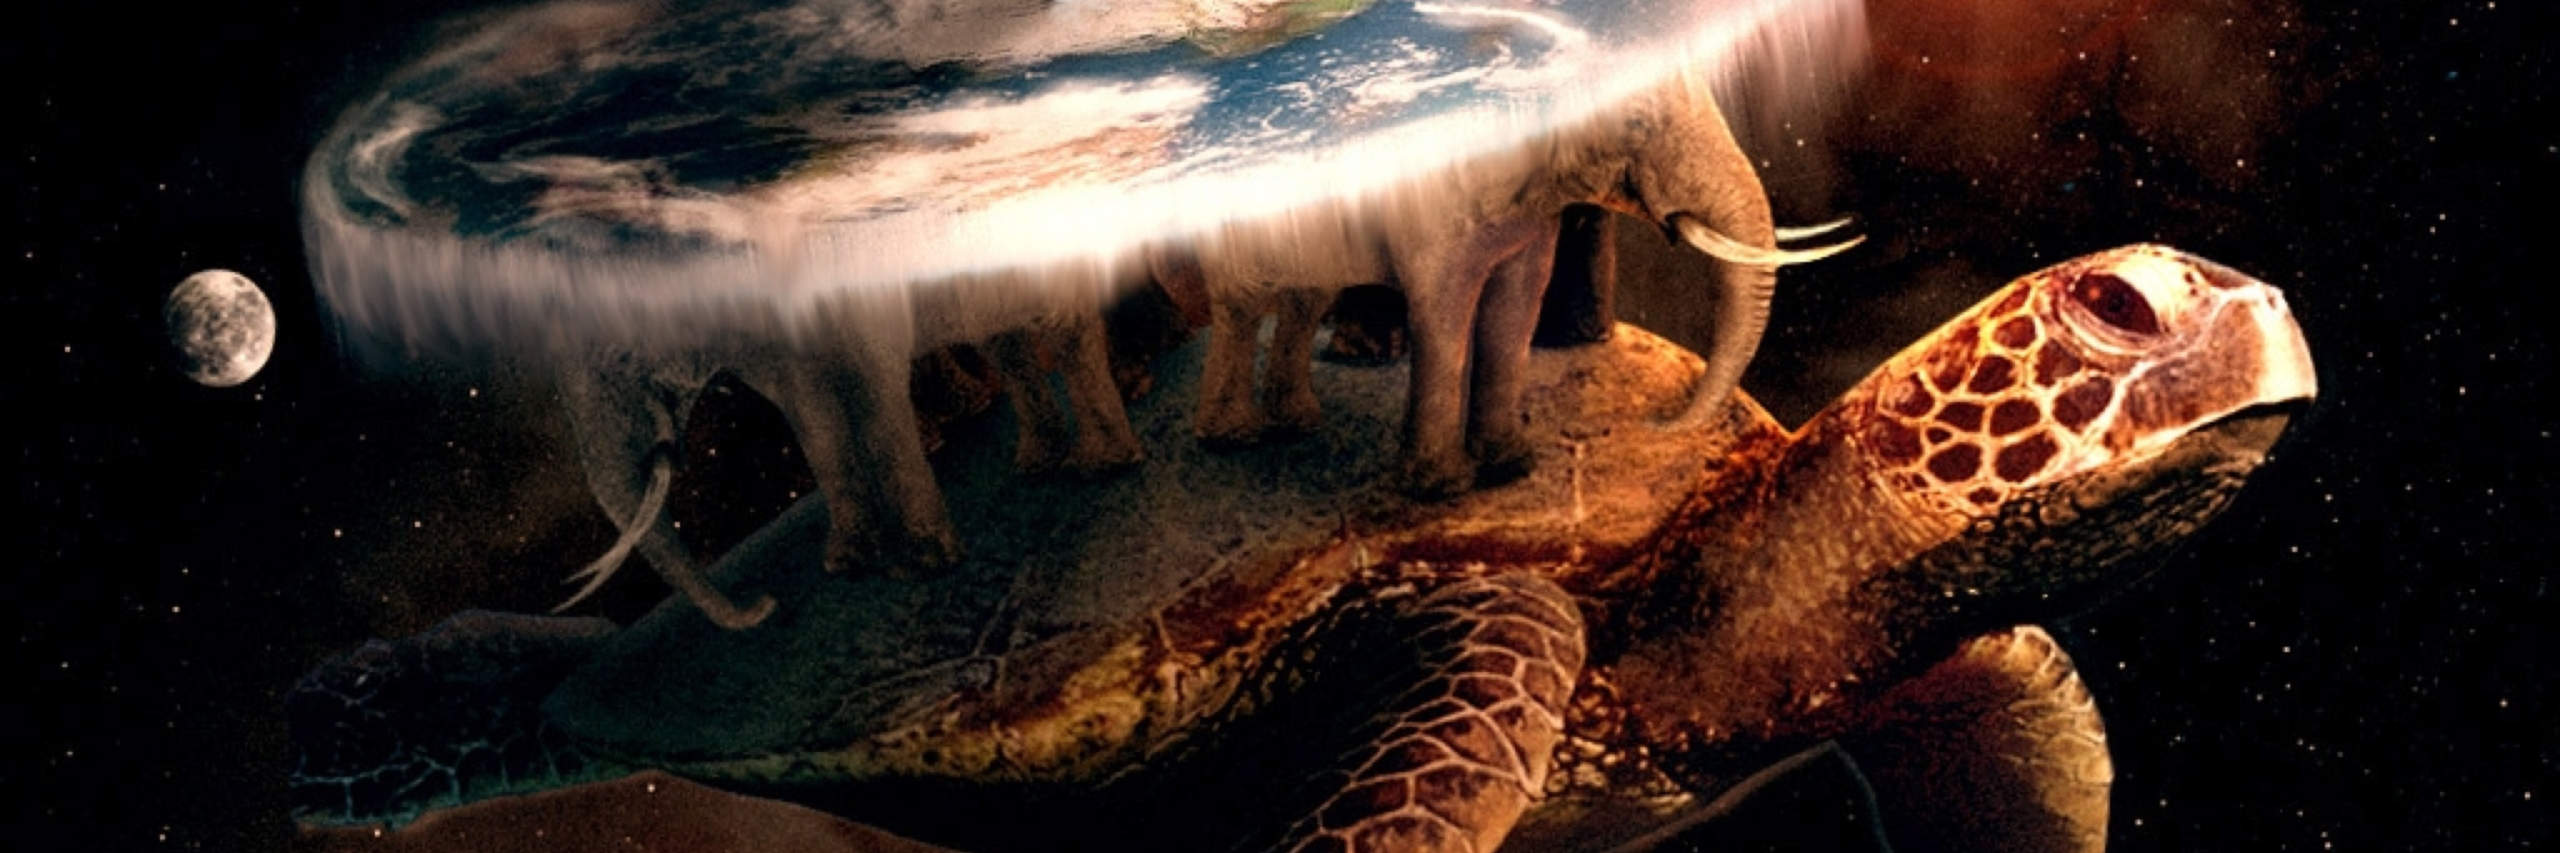 The Discworld, floating through space on a giant turtle. Source: http://www.paperhi.com/Toplist_Best_20816/download_2560x1600